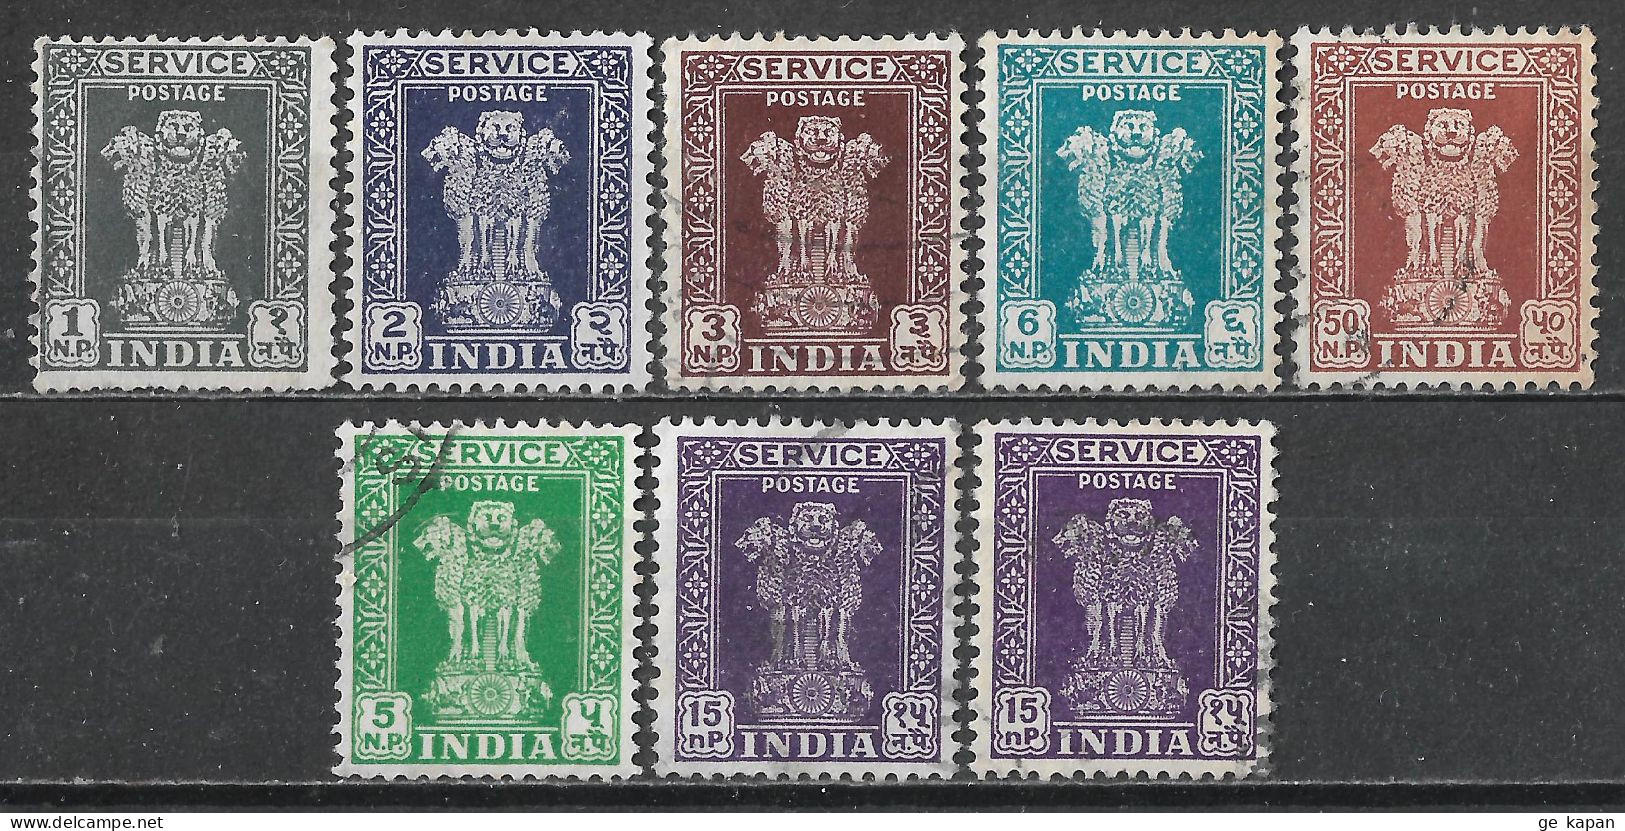 1957,1958 INDIA SET OF 8 OFFICIAL USED STAMPS (Michel # 131-133,135,140,144,148) - Dienstmarken